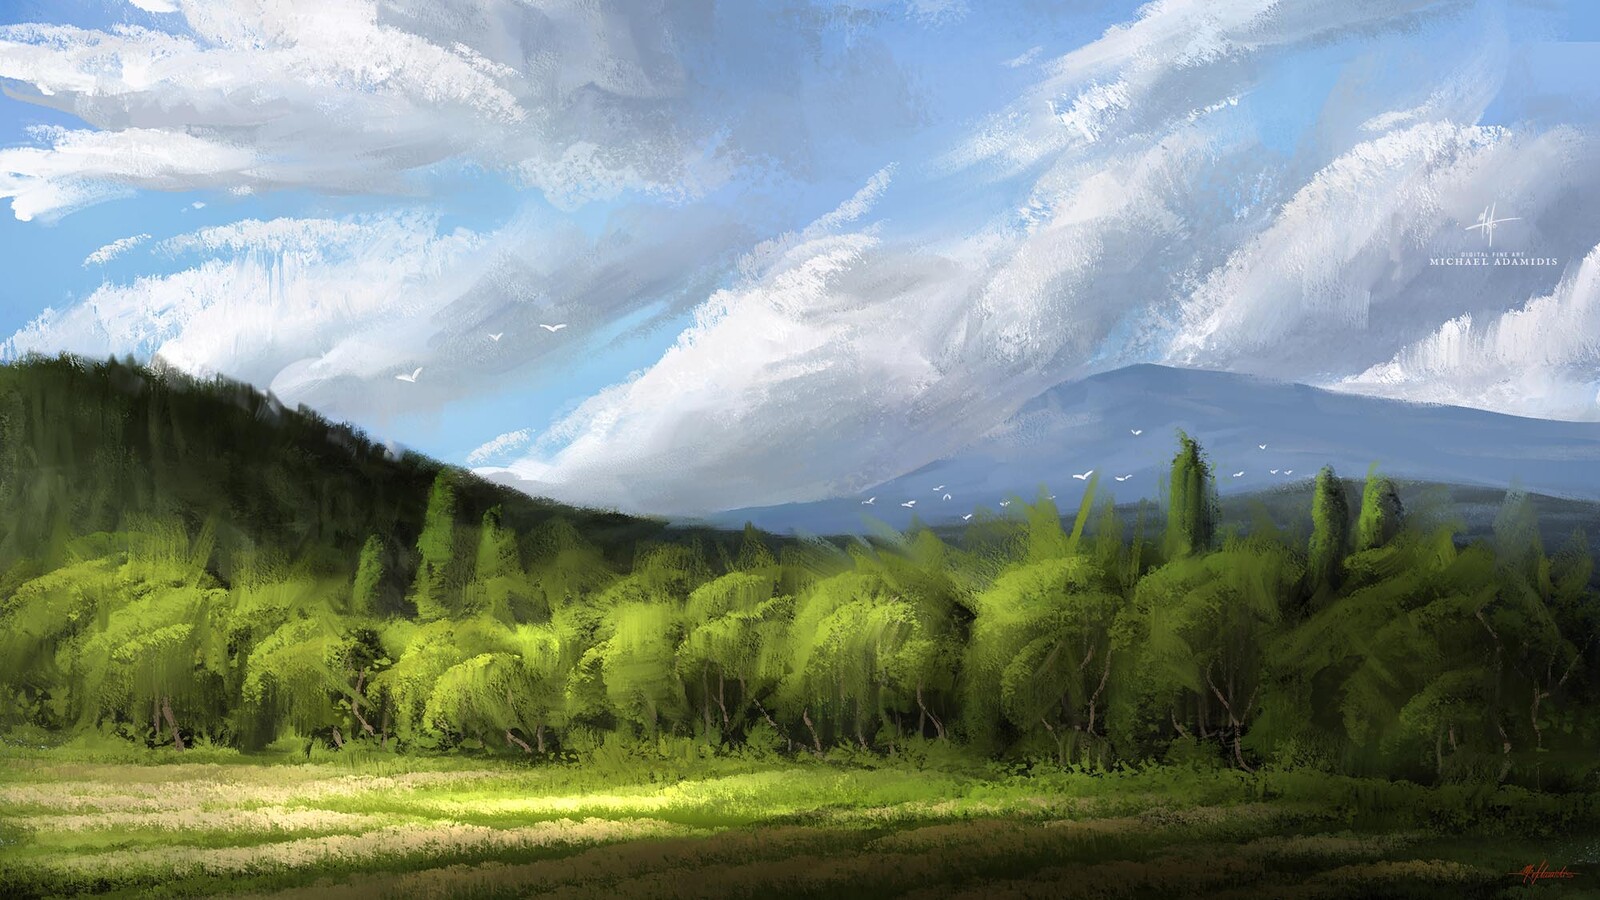 Digital Landscape Painting HQ - Shadows and Lights